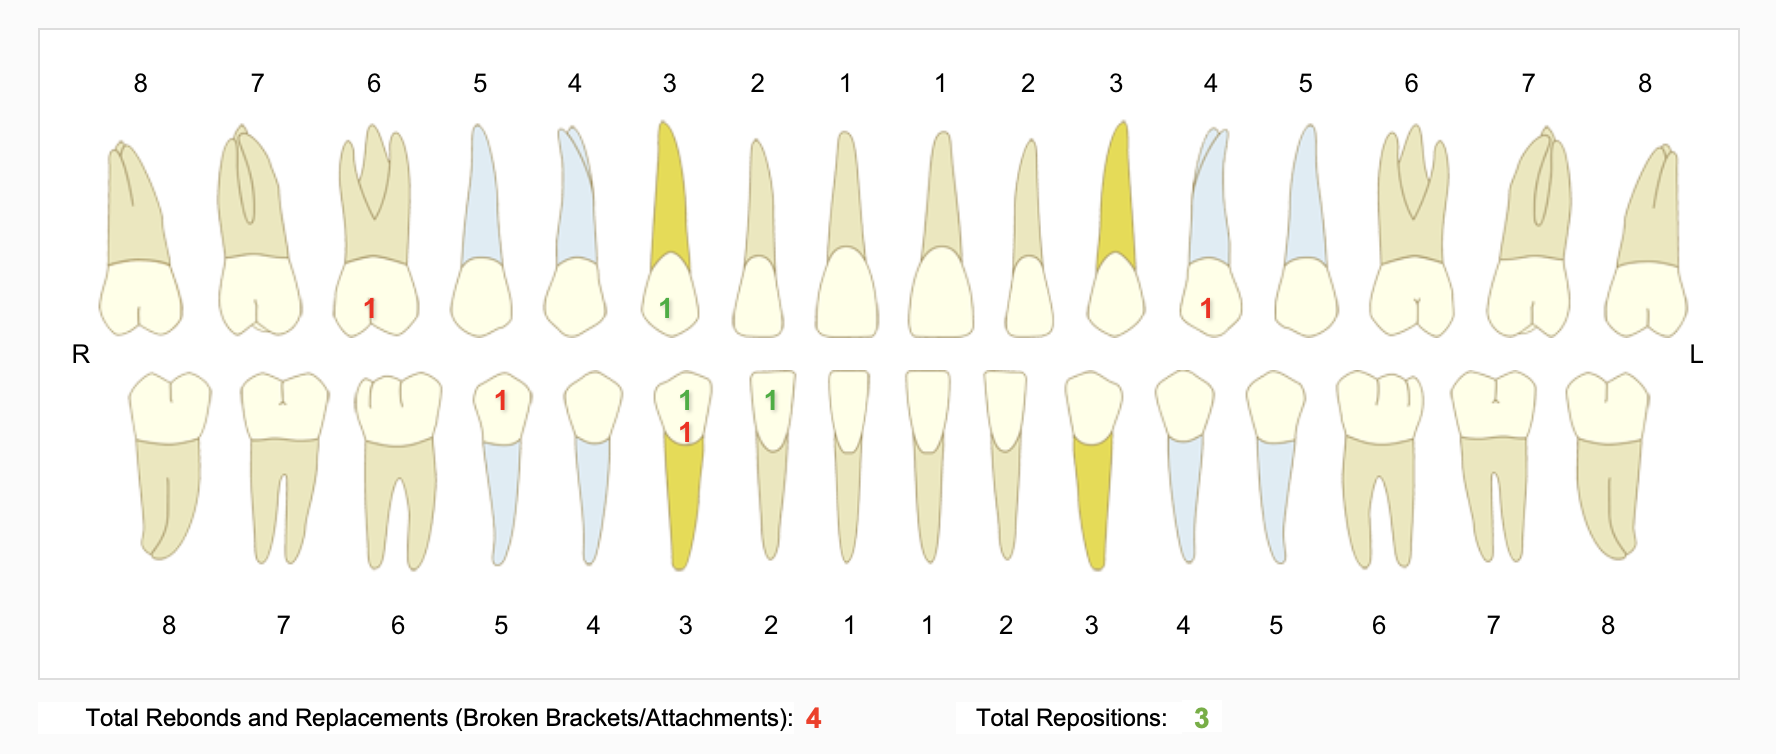 A screenshot of a tooth chart with red and green numbers over some teeth, indicating the number of broken brackets and replacements that the patient has had